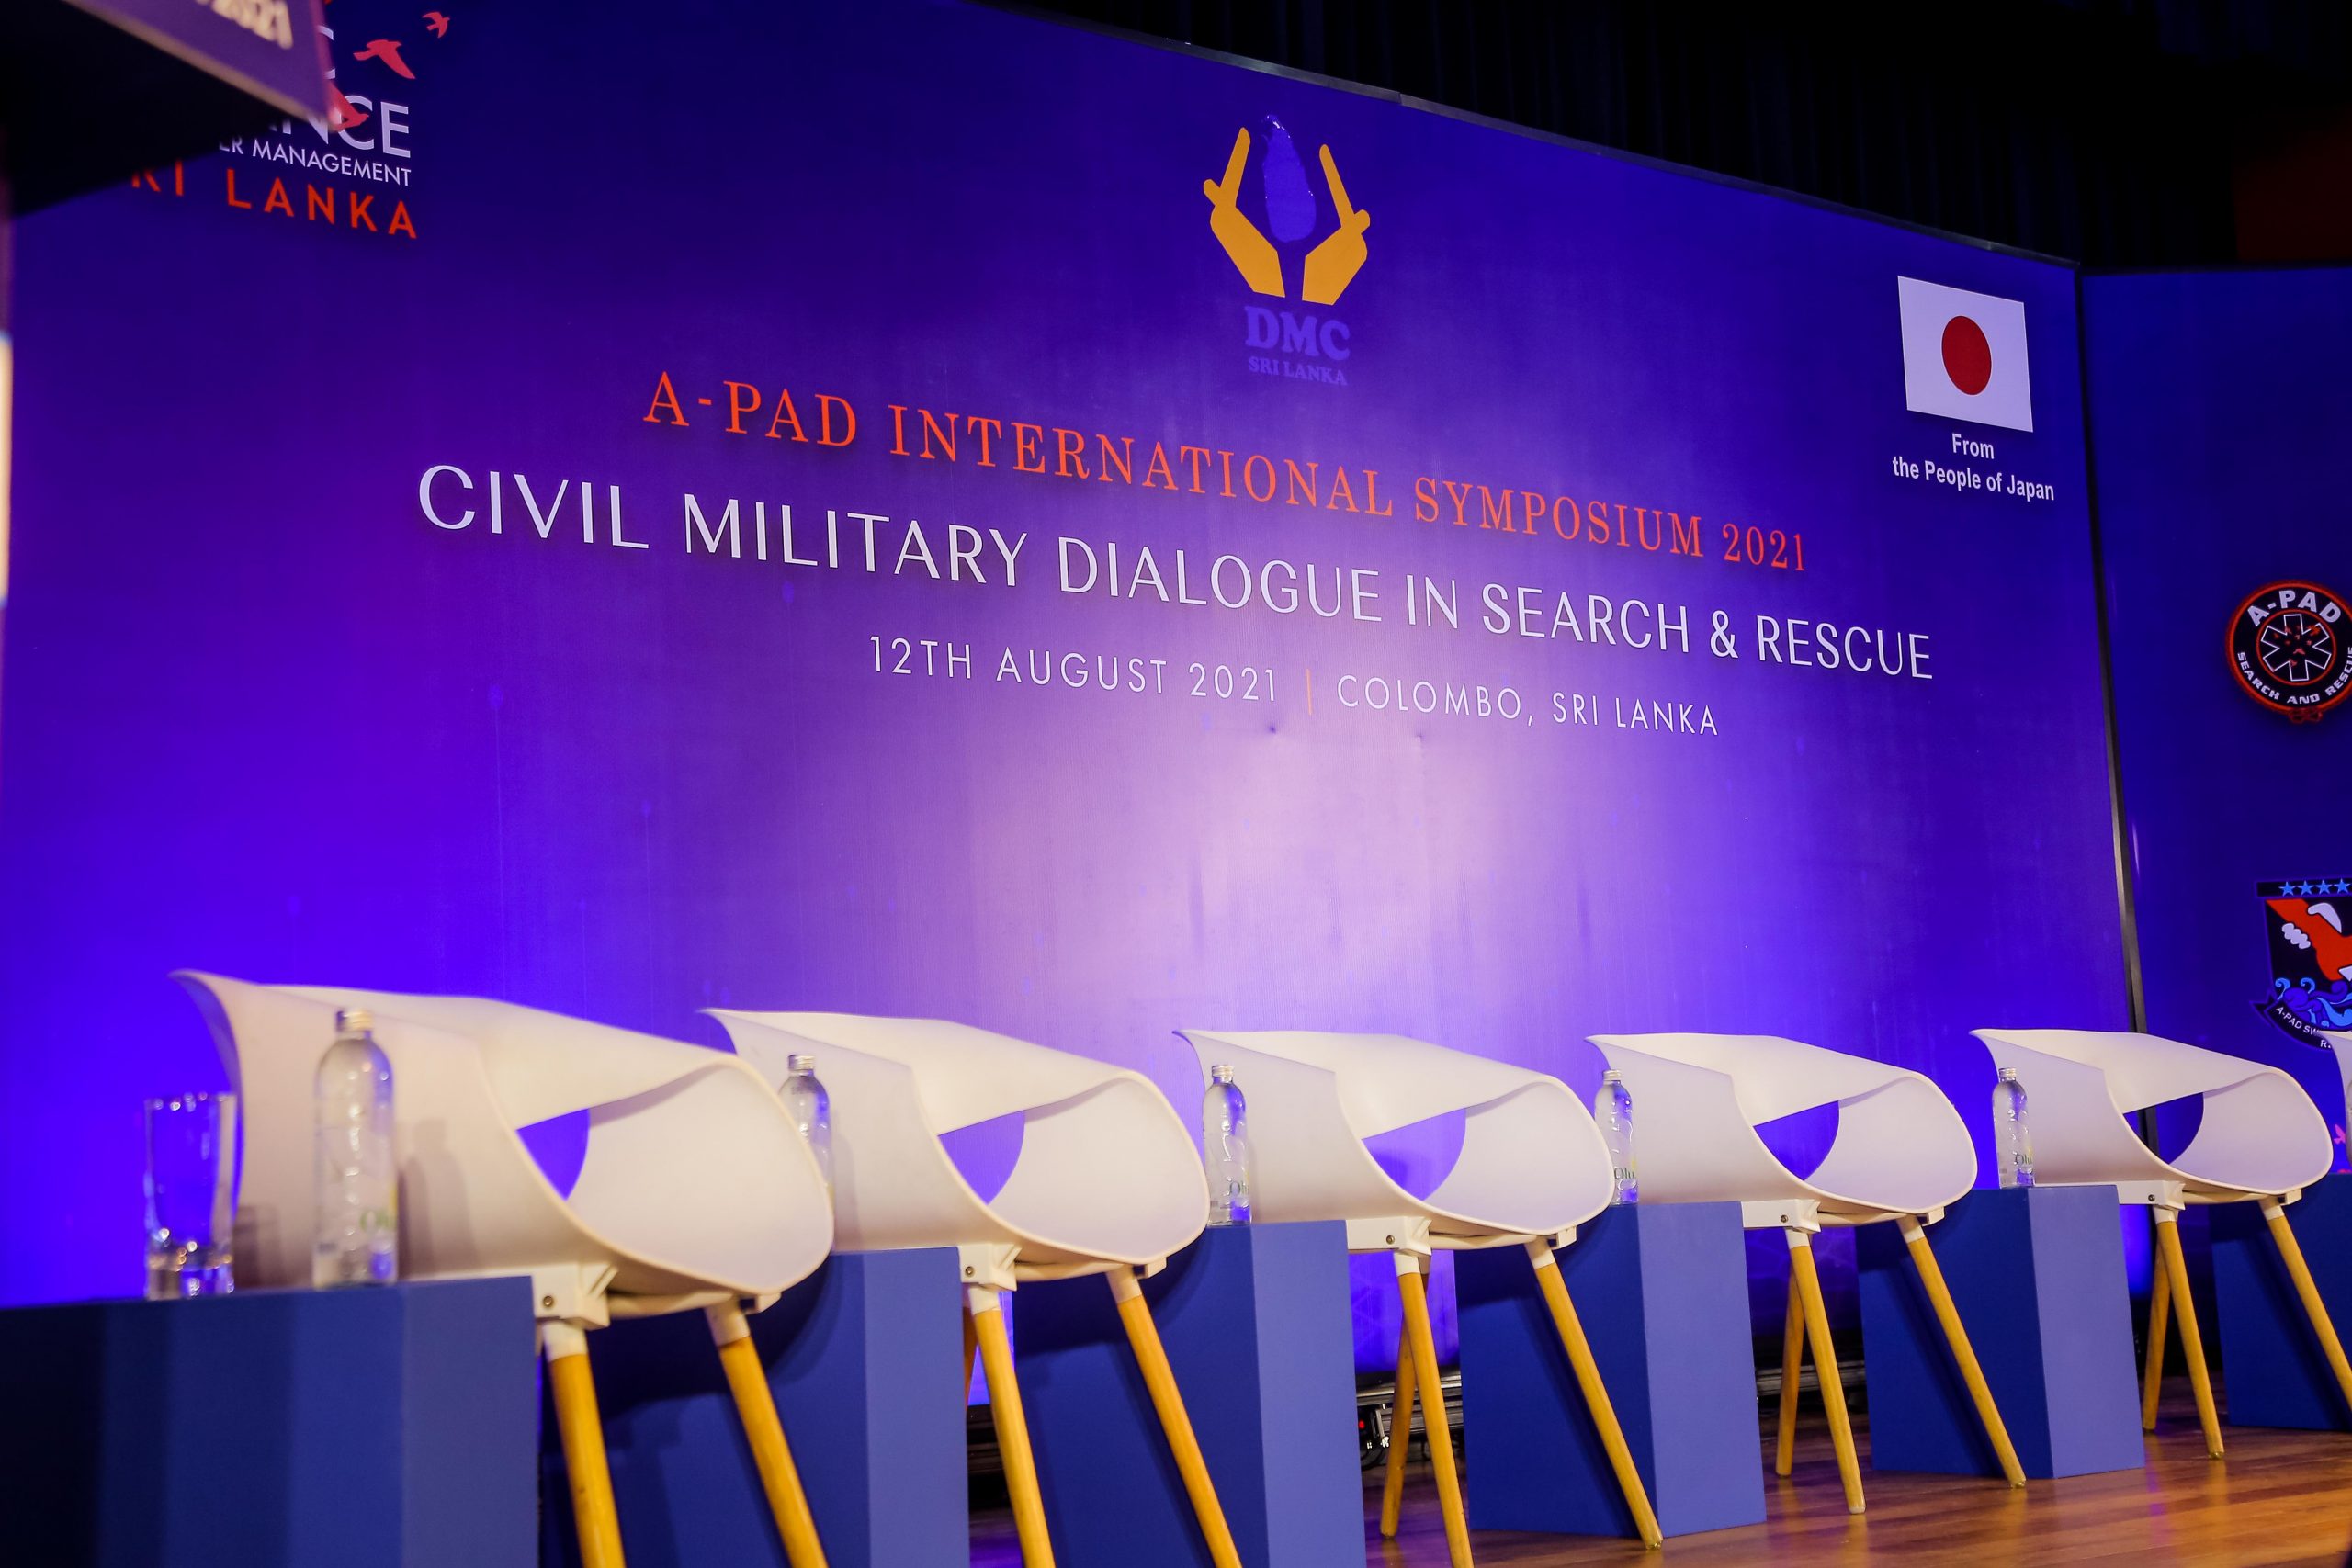 A-PAD SL Hosts International Symposium on Civil Military Dialogue in Search & Rescue